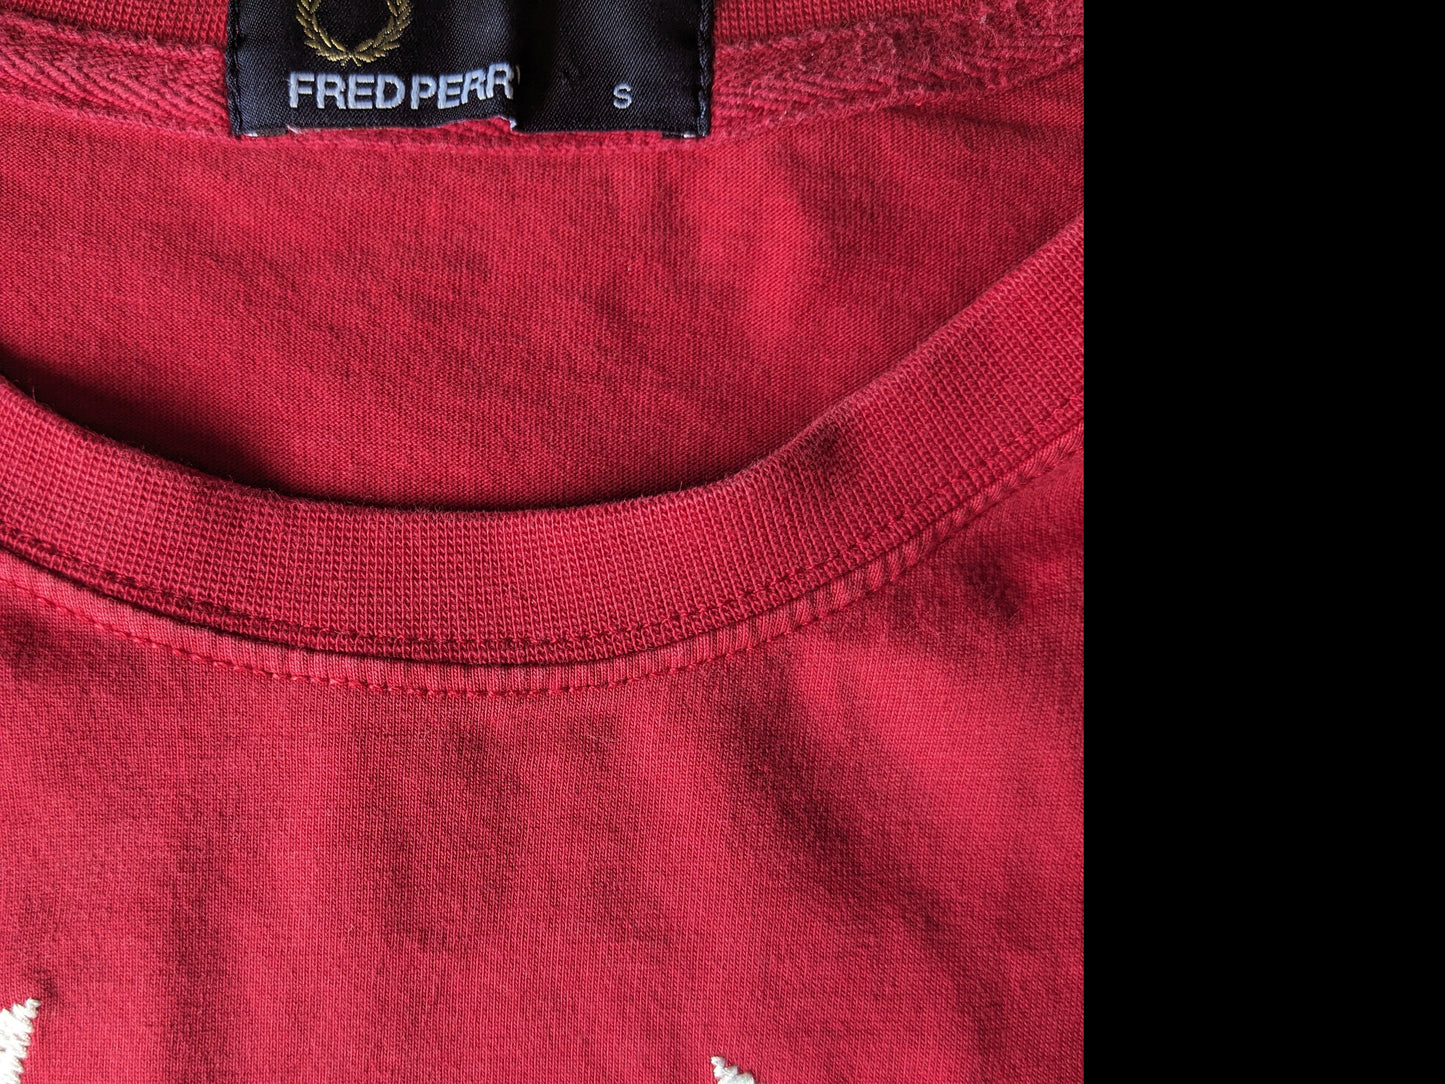 Fred Perry Shirt. Red colored with white application. Size S.